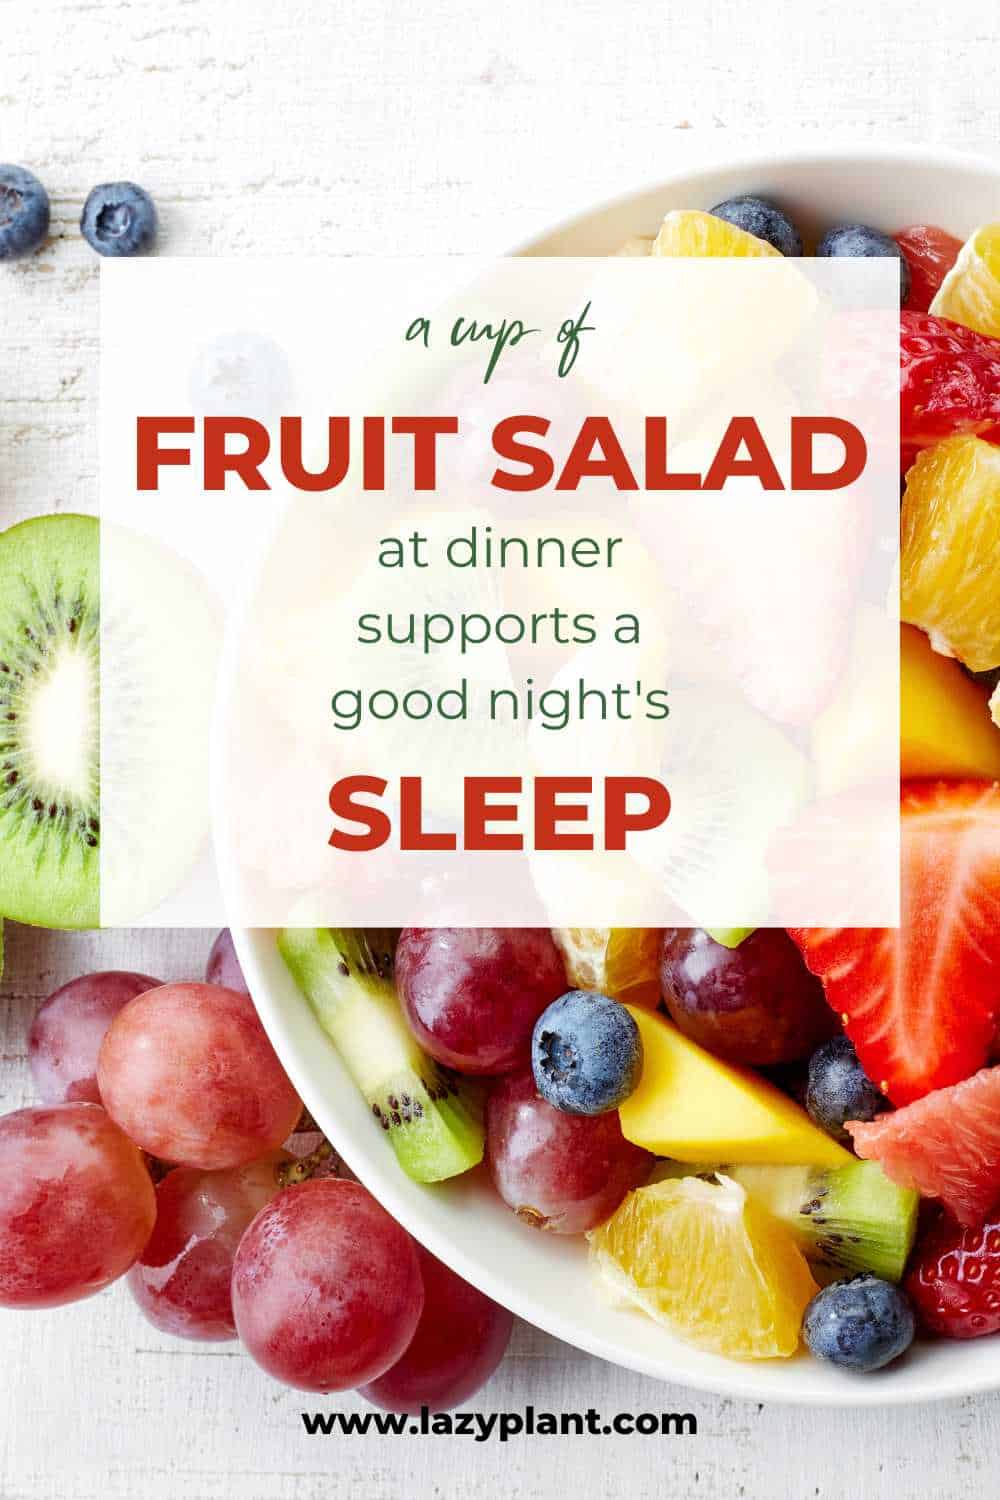 Can I improve sleep quality & duration by eating a fruit salad at dinner?